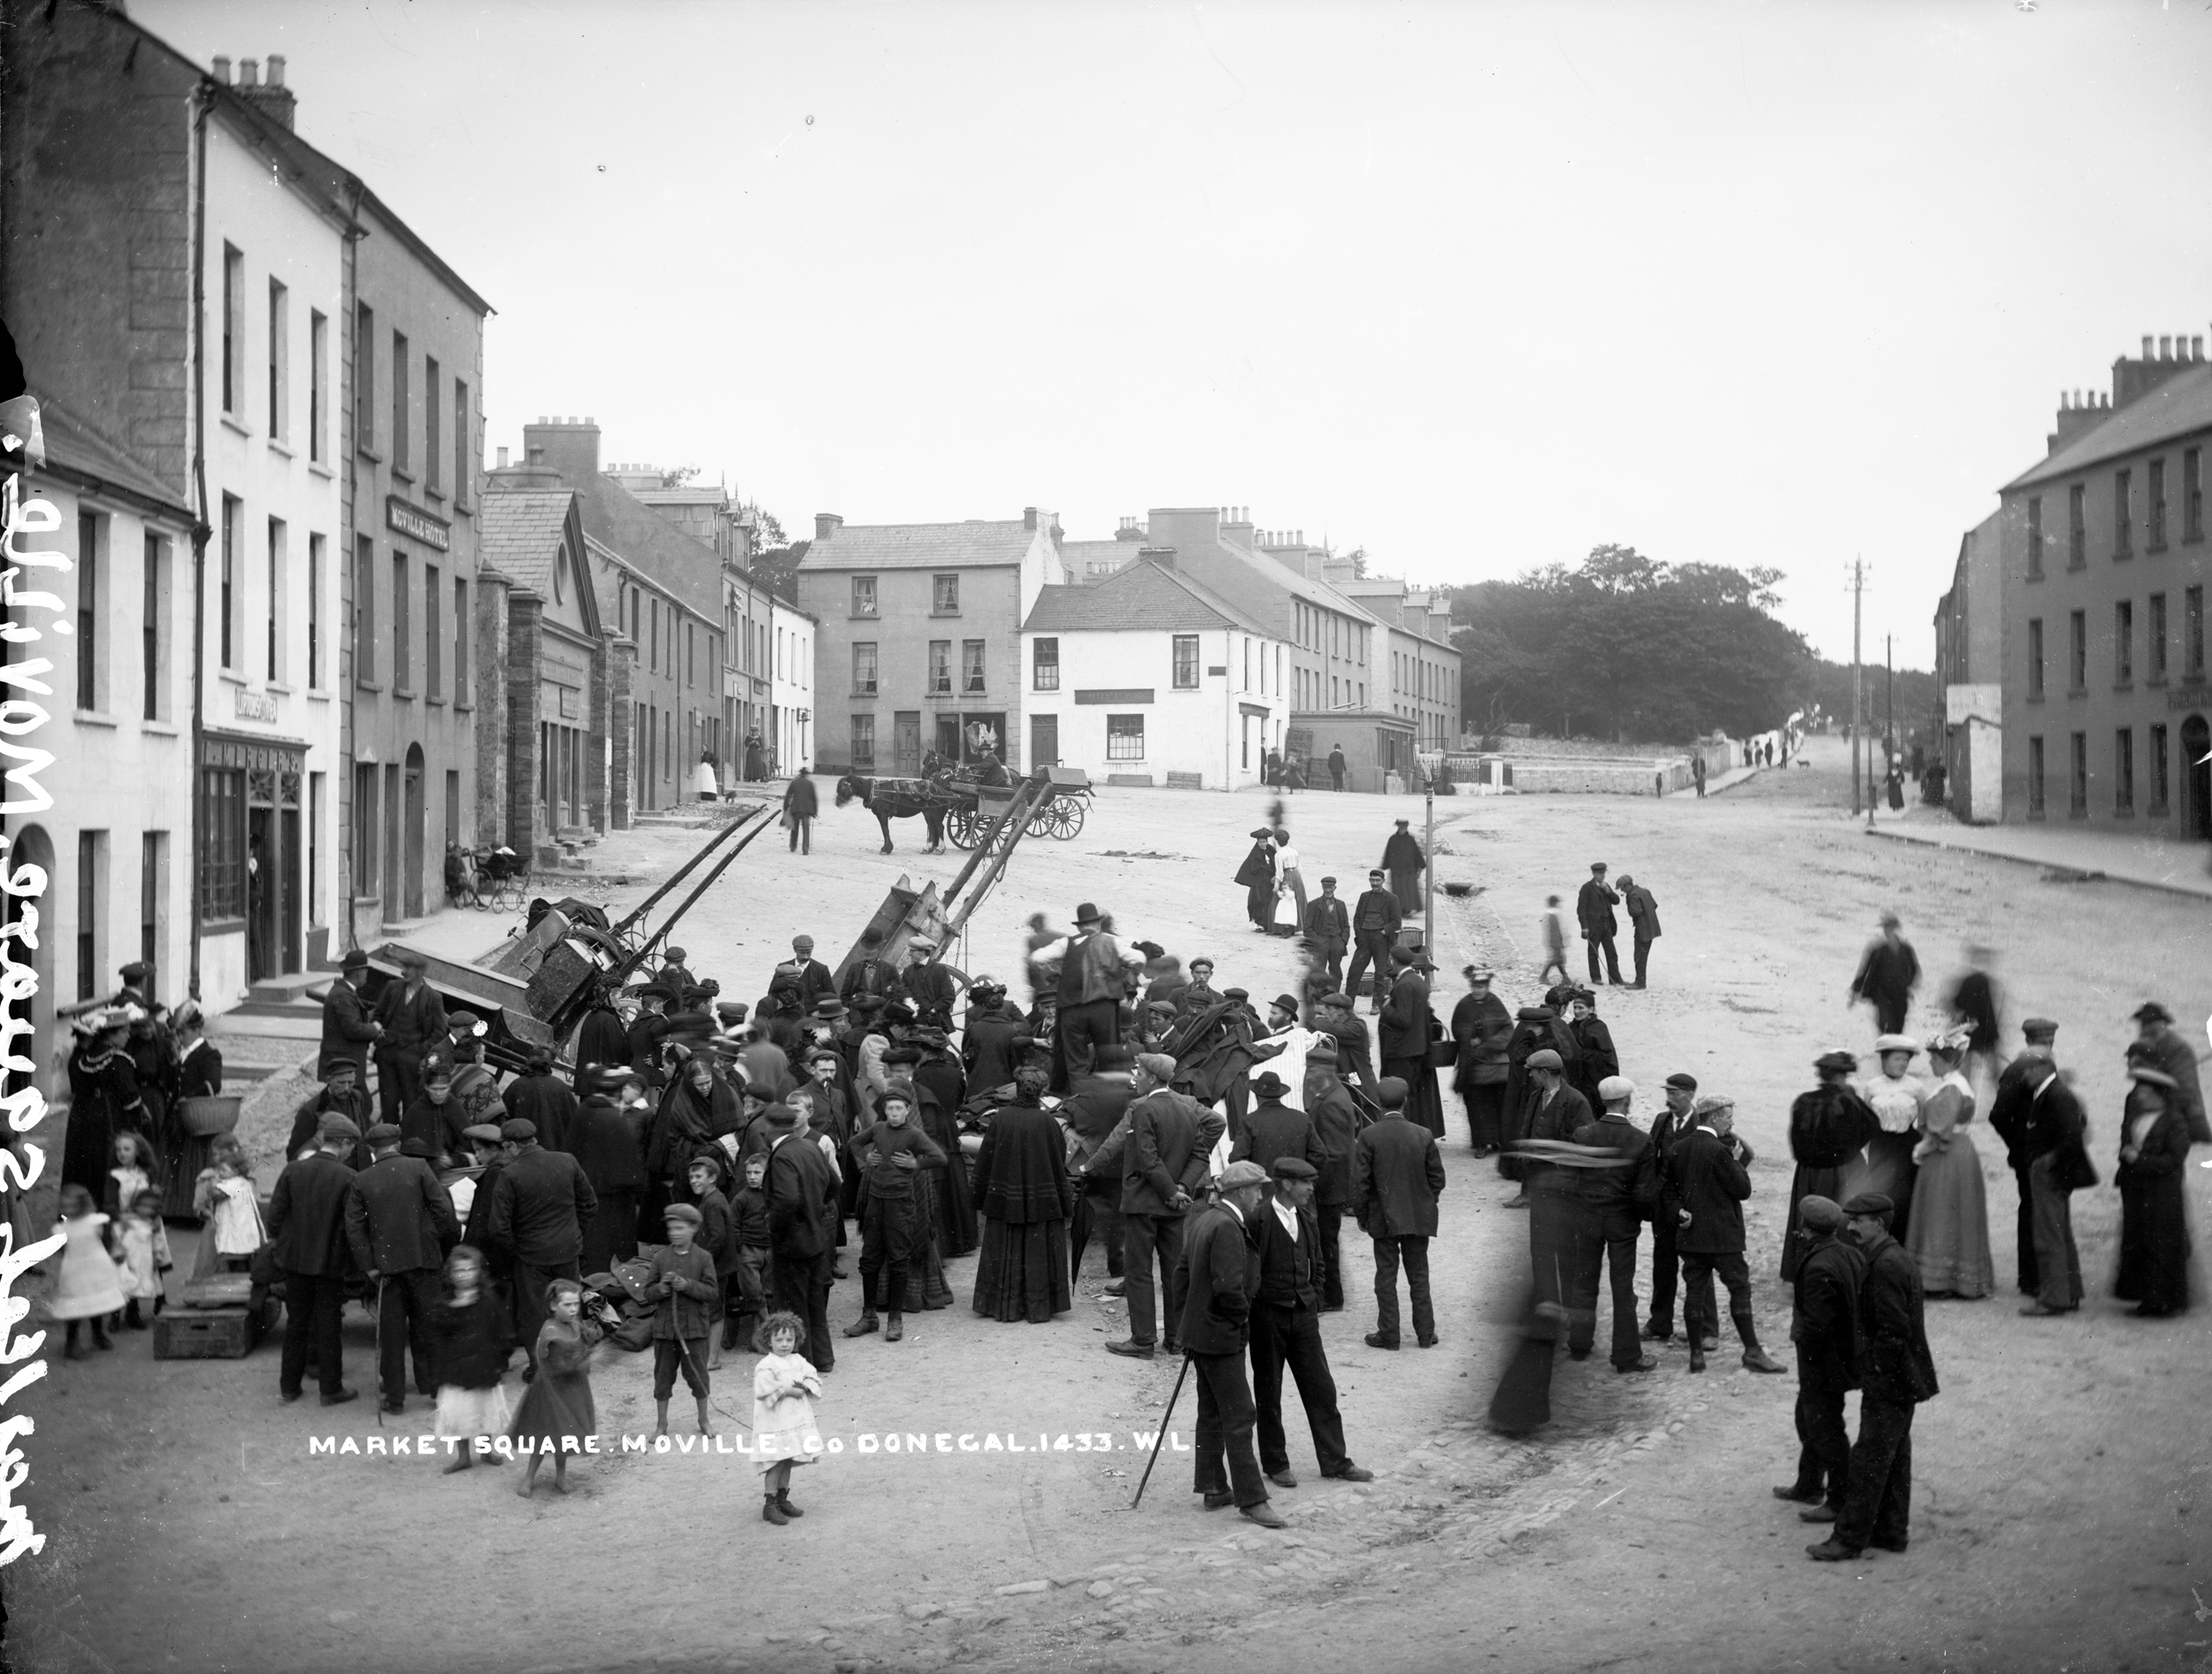 Market Square, Moville, Co. Donegal (7534144708)